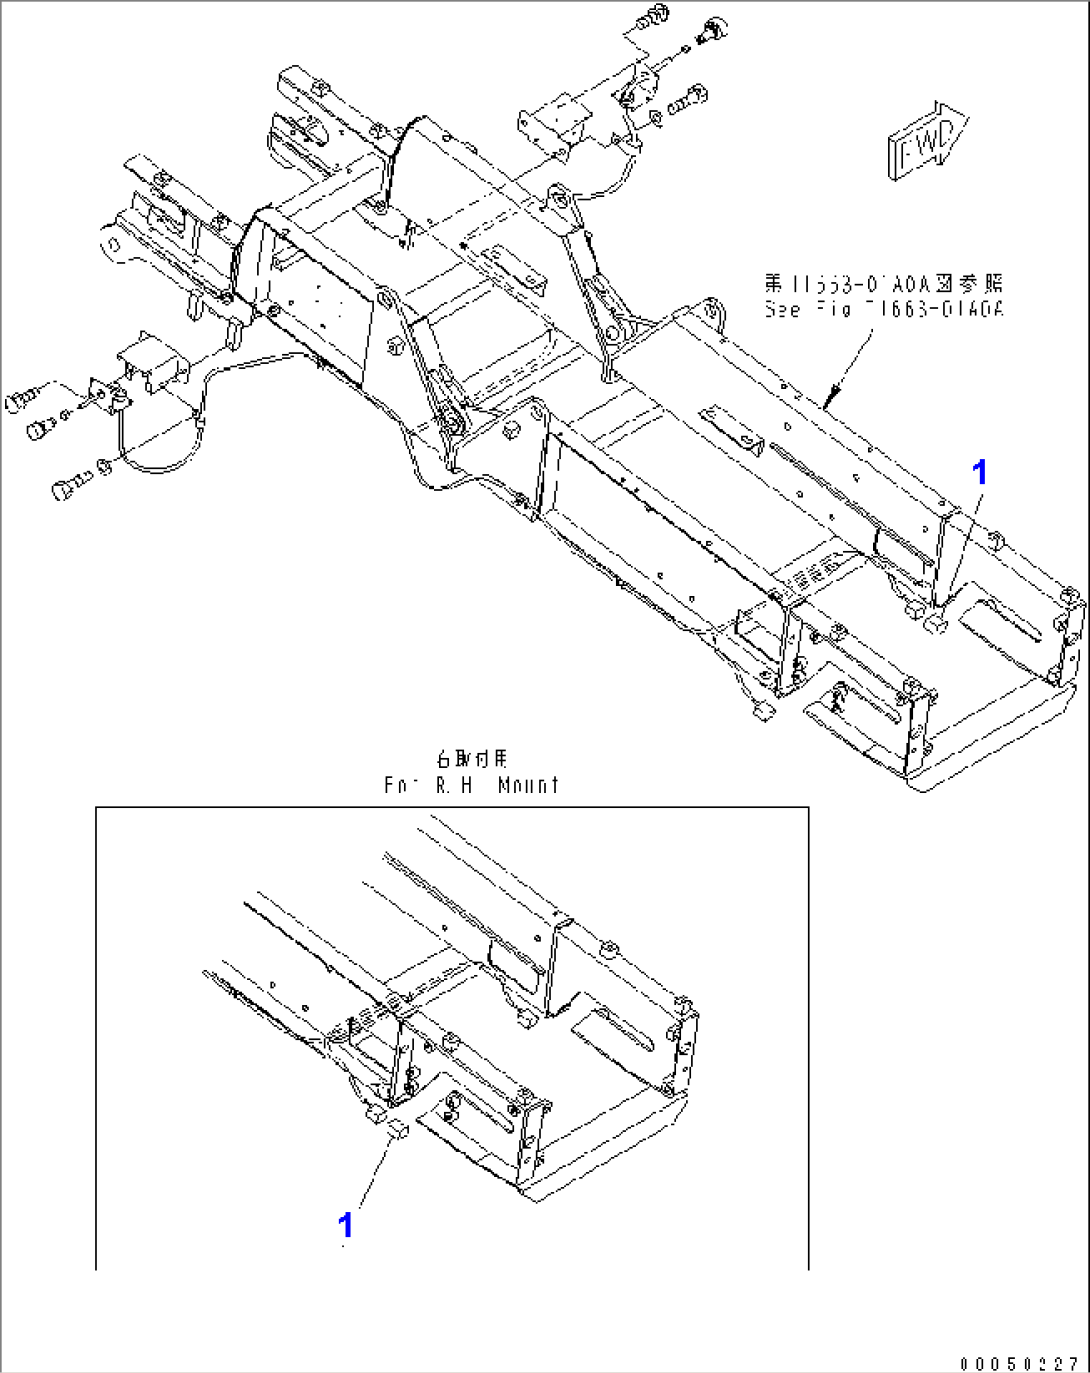 SIDE CONVEYOR (INNER PARTS) (CONNECTOR)